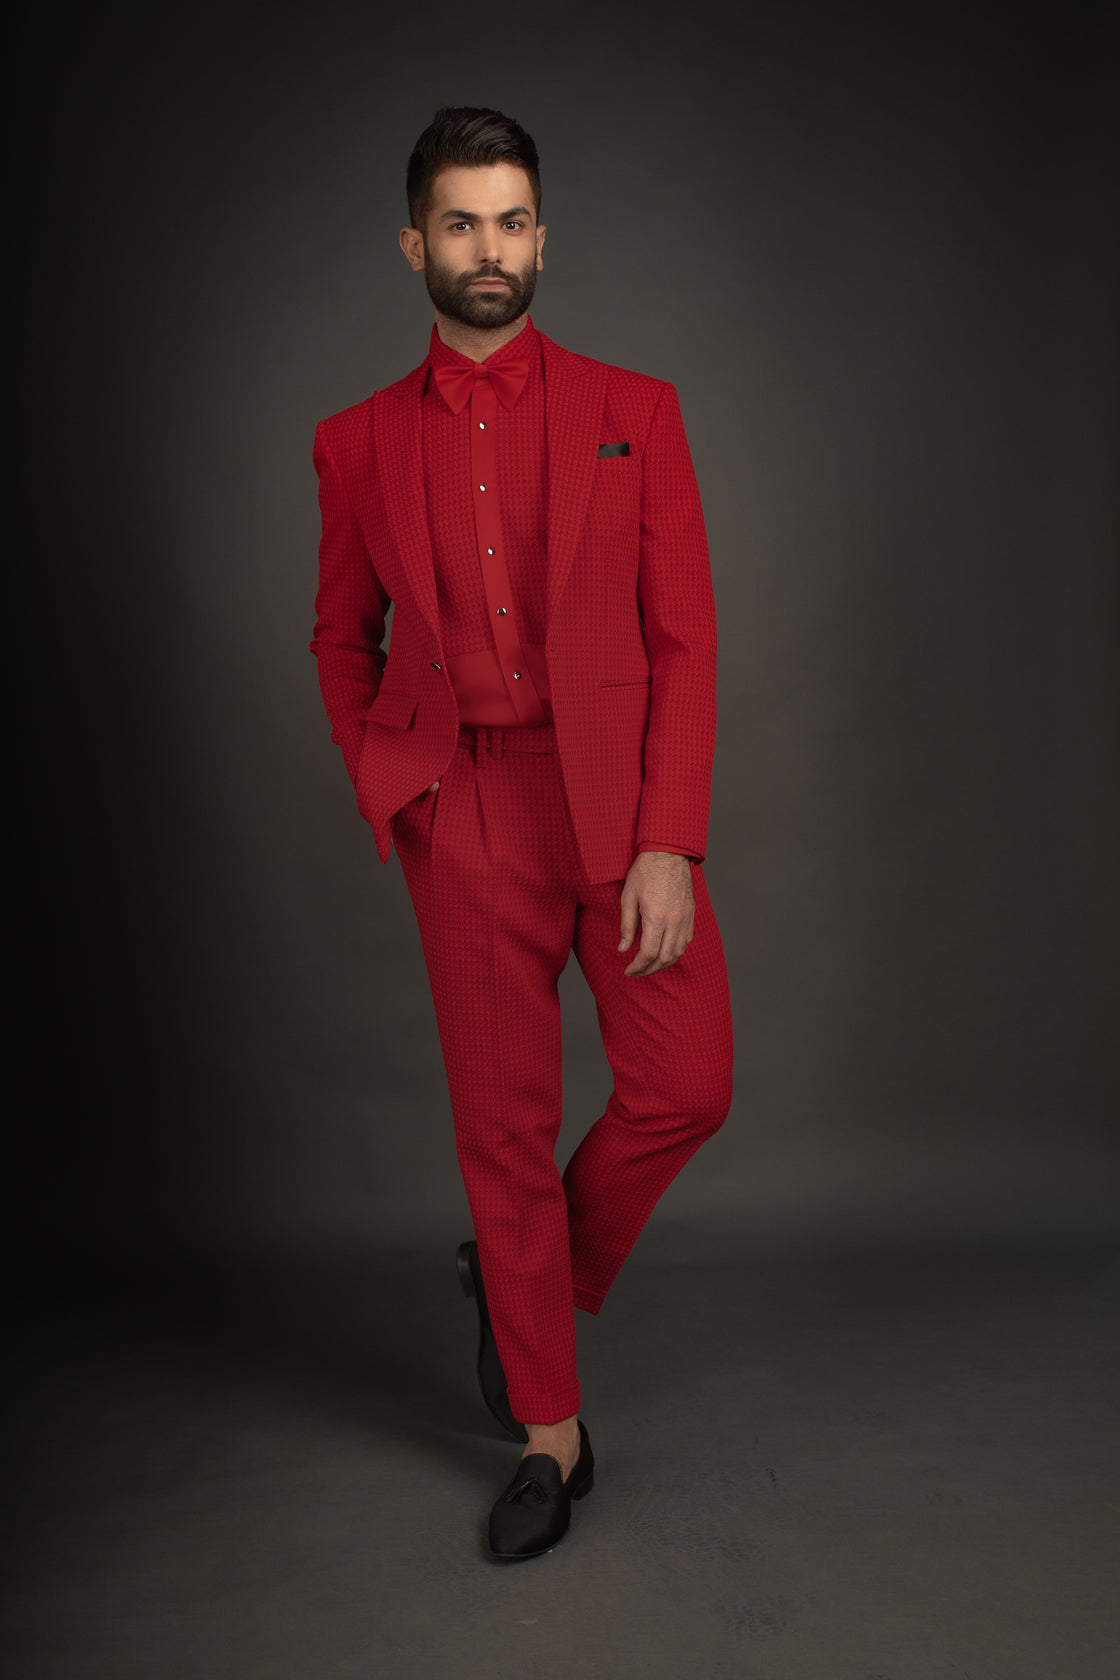 Red Jacket, Shirt, & Trousers